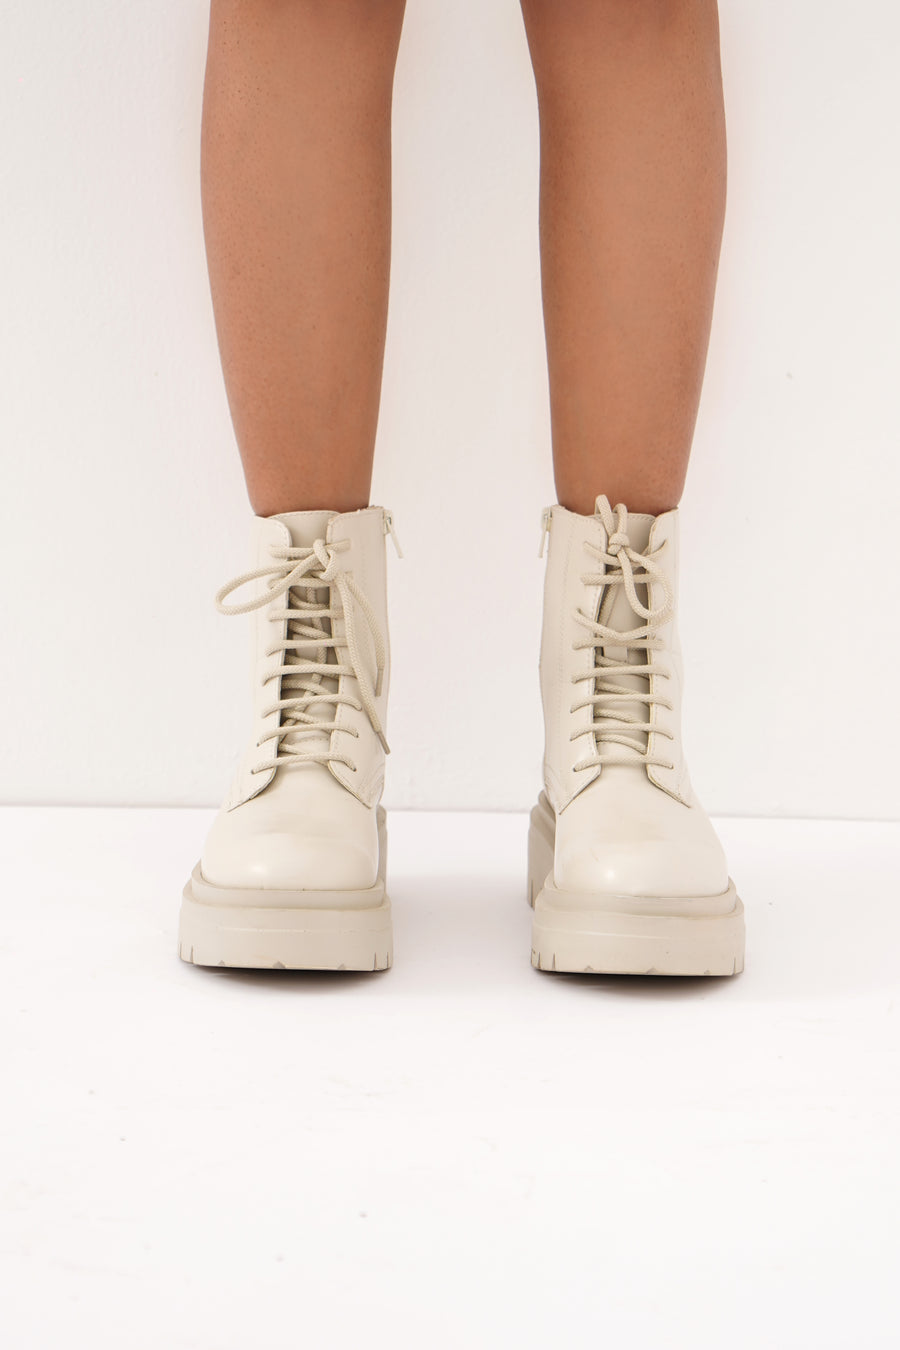 EMBER CHUNKY BOOTS CREAM